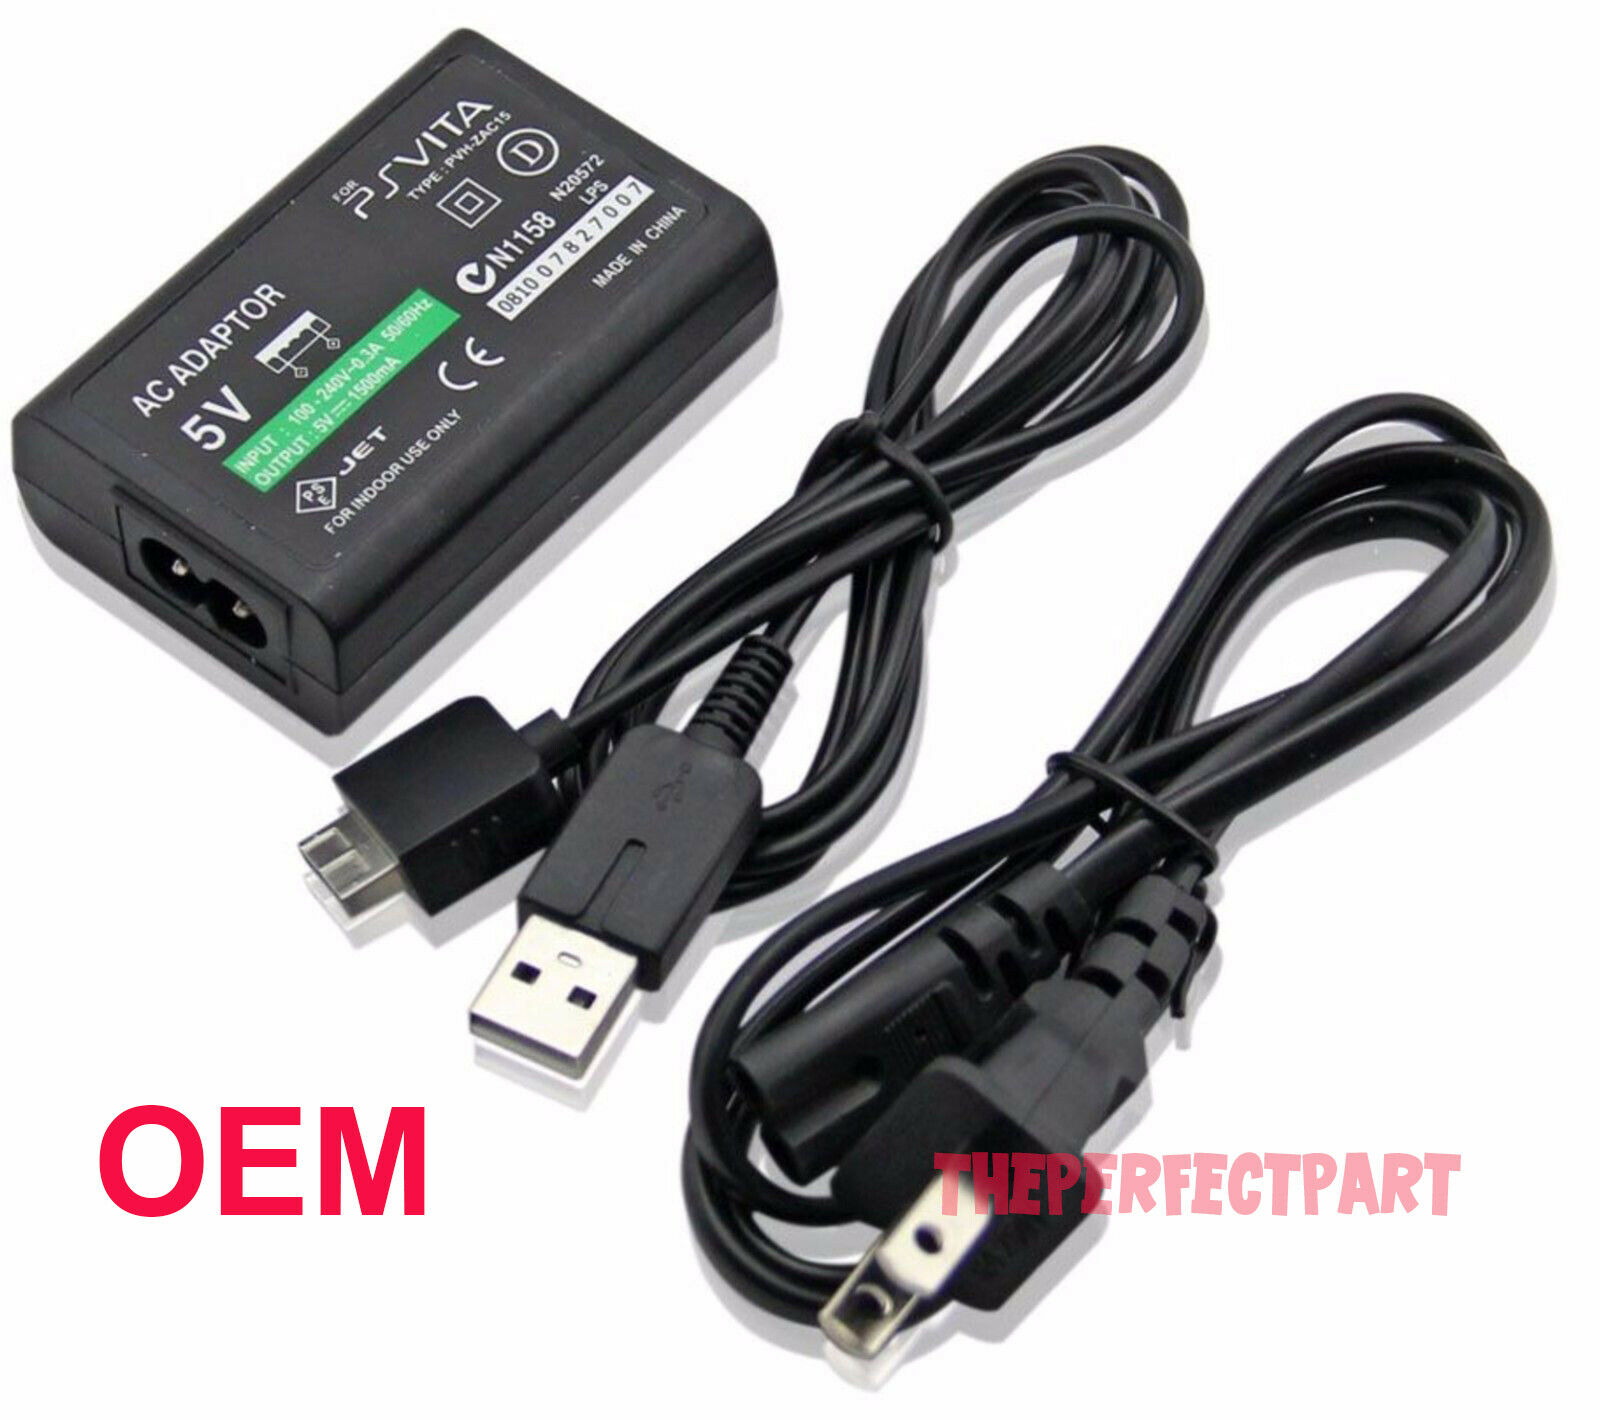 PS Vita - PCH-1000 5v 1500ma AC Adapter Power Supply USB Data Cable For Sony PS Vi - Click Image to Close